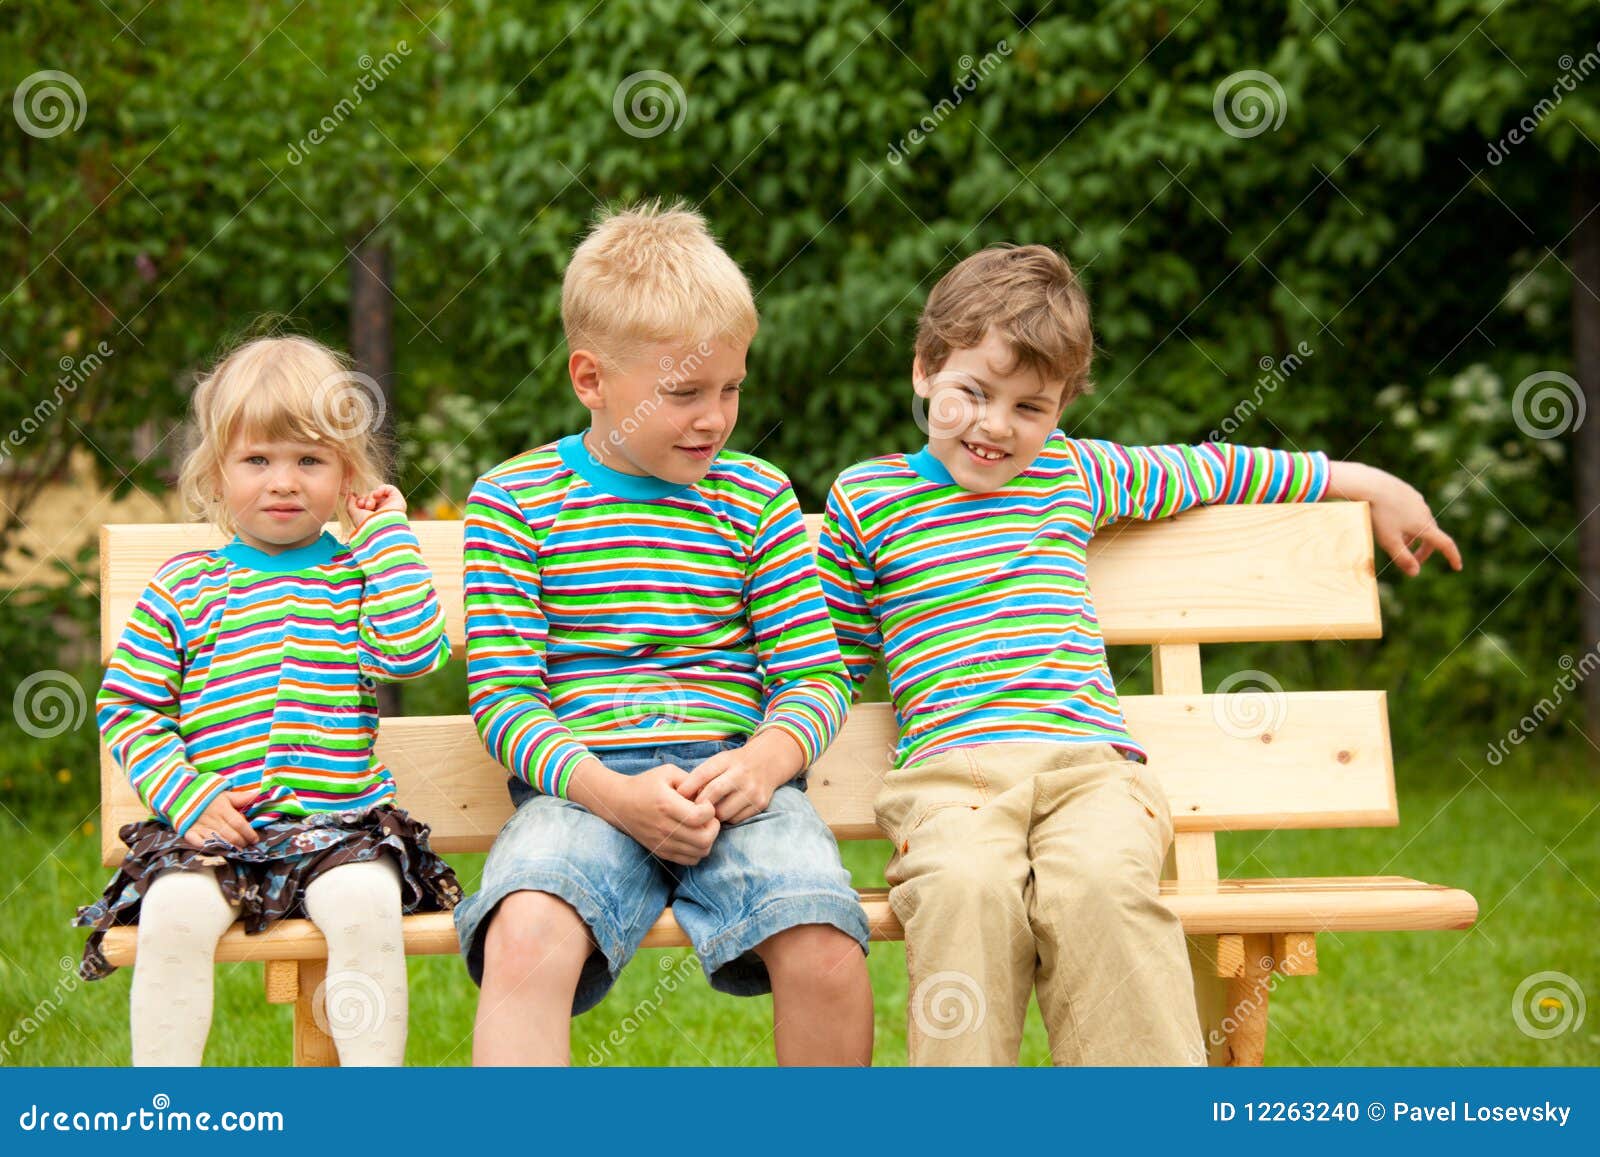 three children on a bench in identical clothes